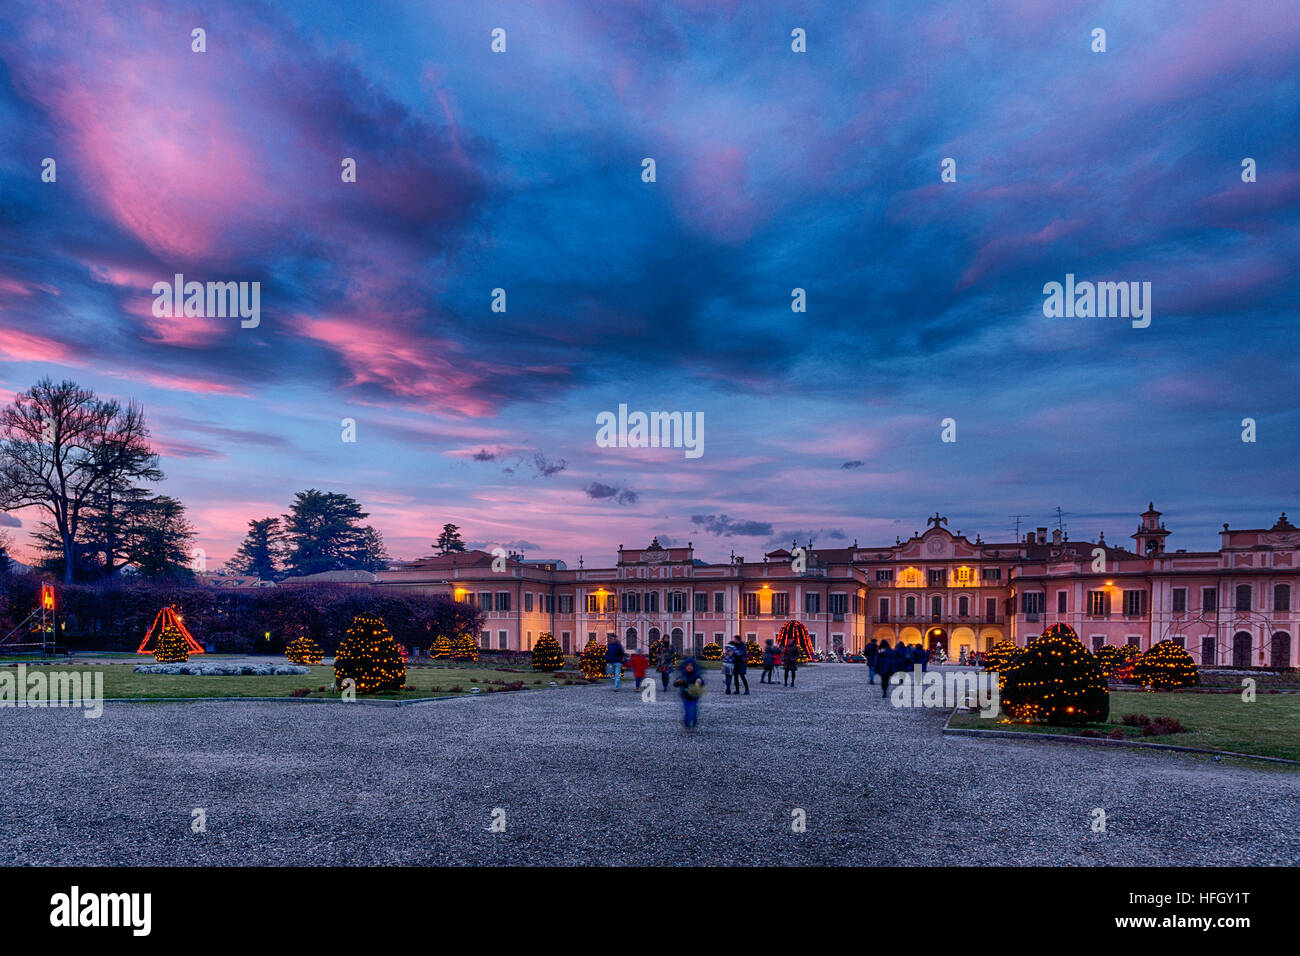 Christmas lights in the public gardens of Estense Palace, Varese Stock Photo